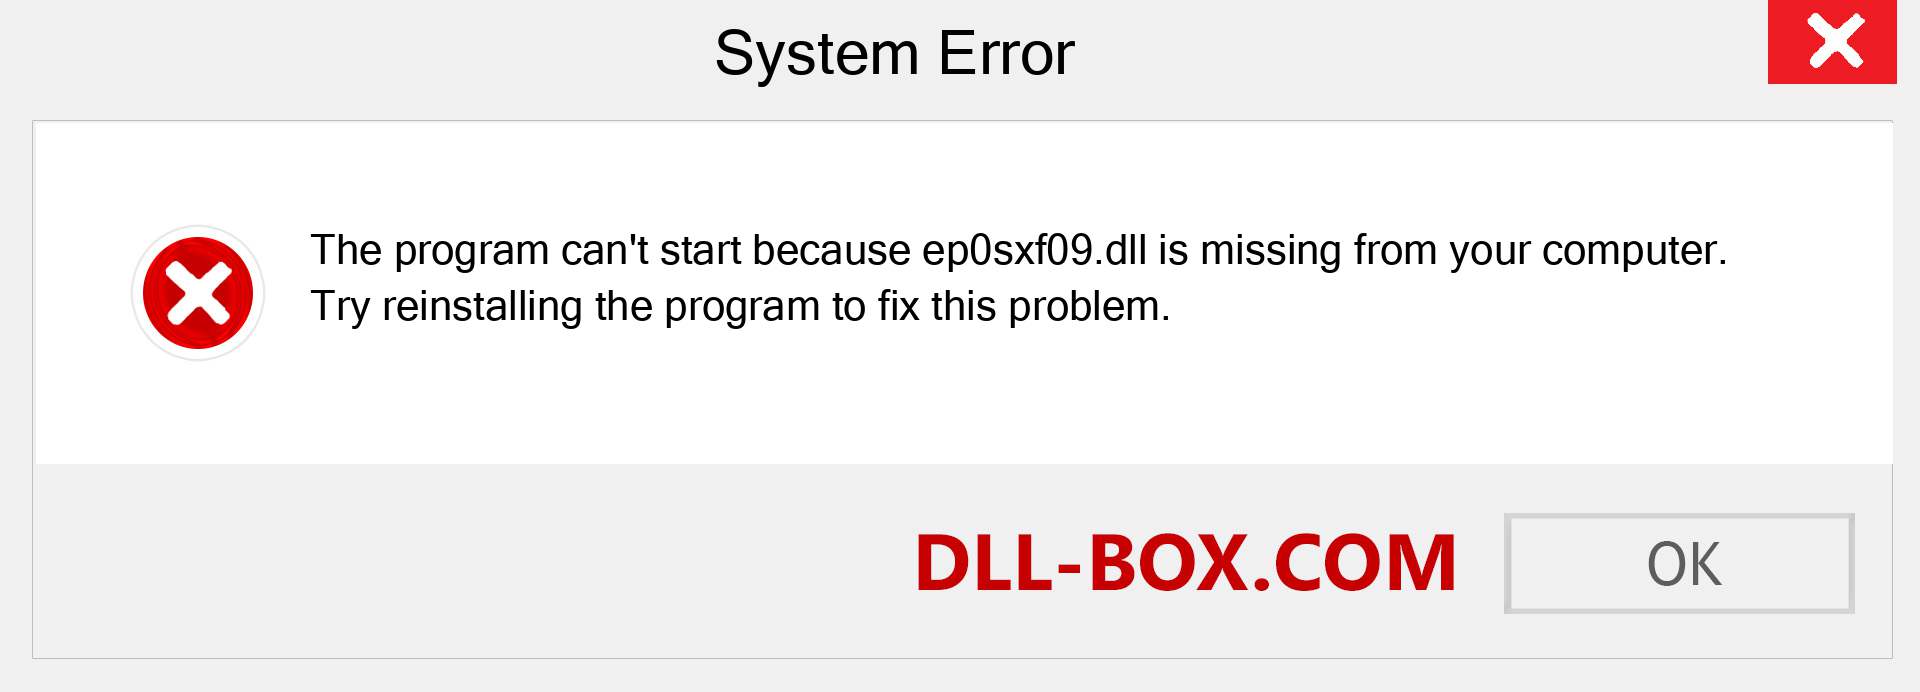  ep0sxf09.dll file is missing?. Download for Windows 7, 8, 10 - Fix  ep0sxf09 dll Missing Error on Windows, photos, images